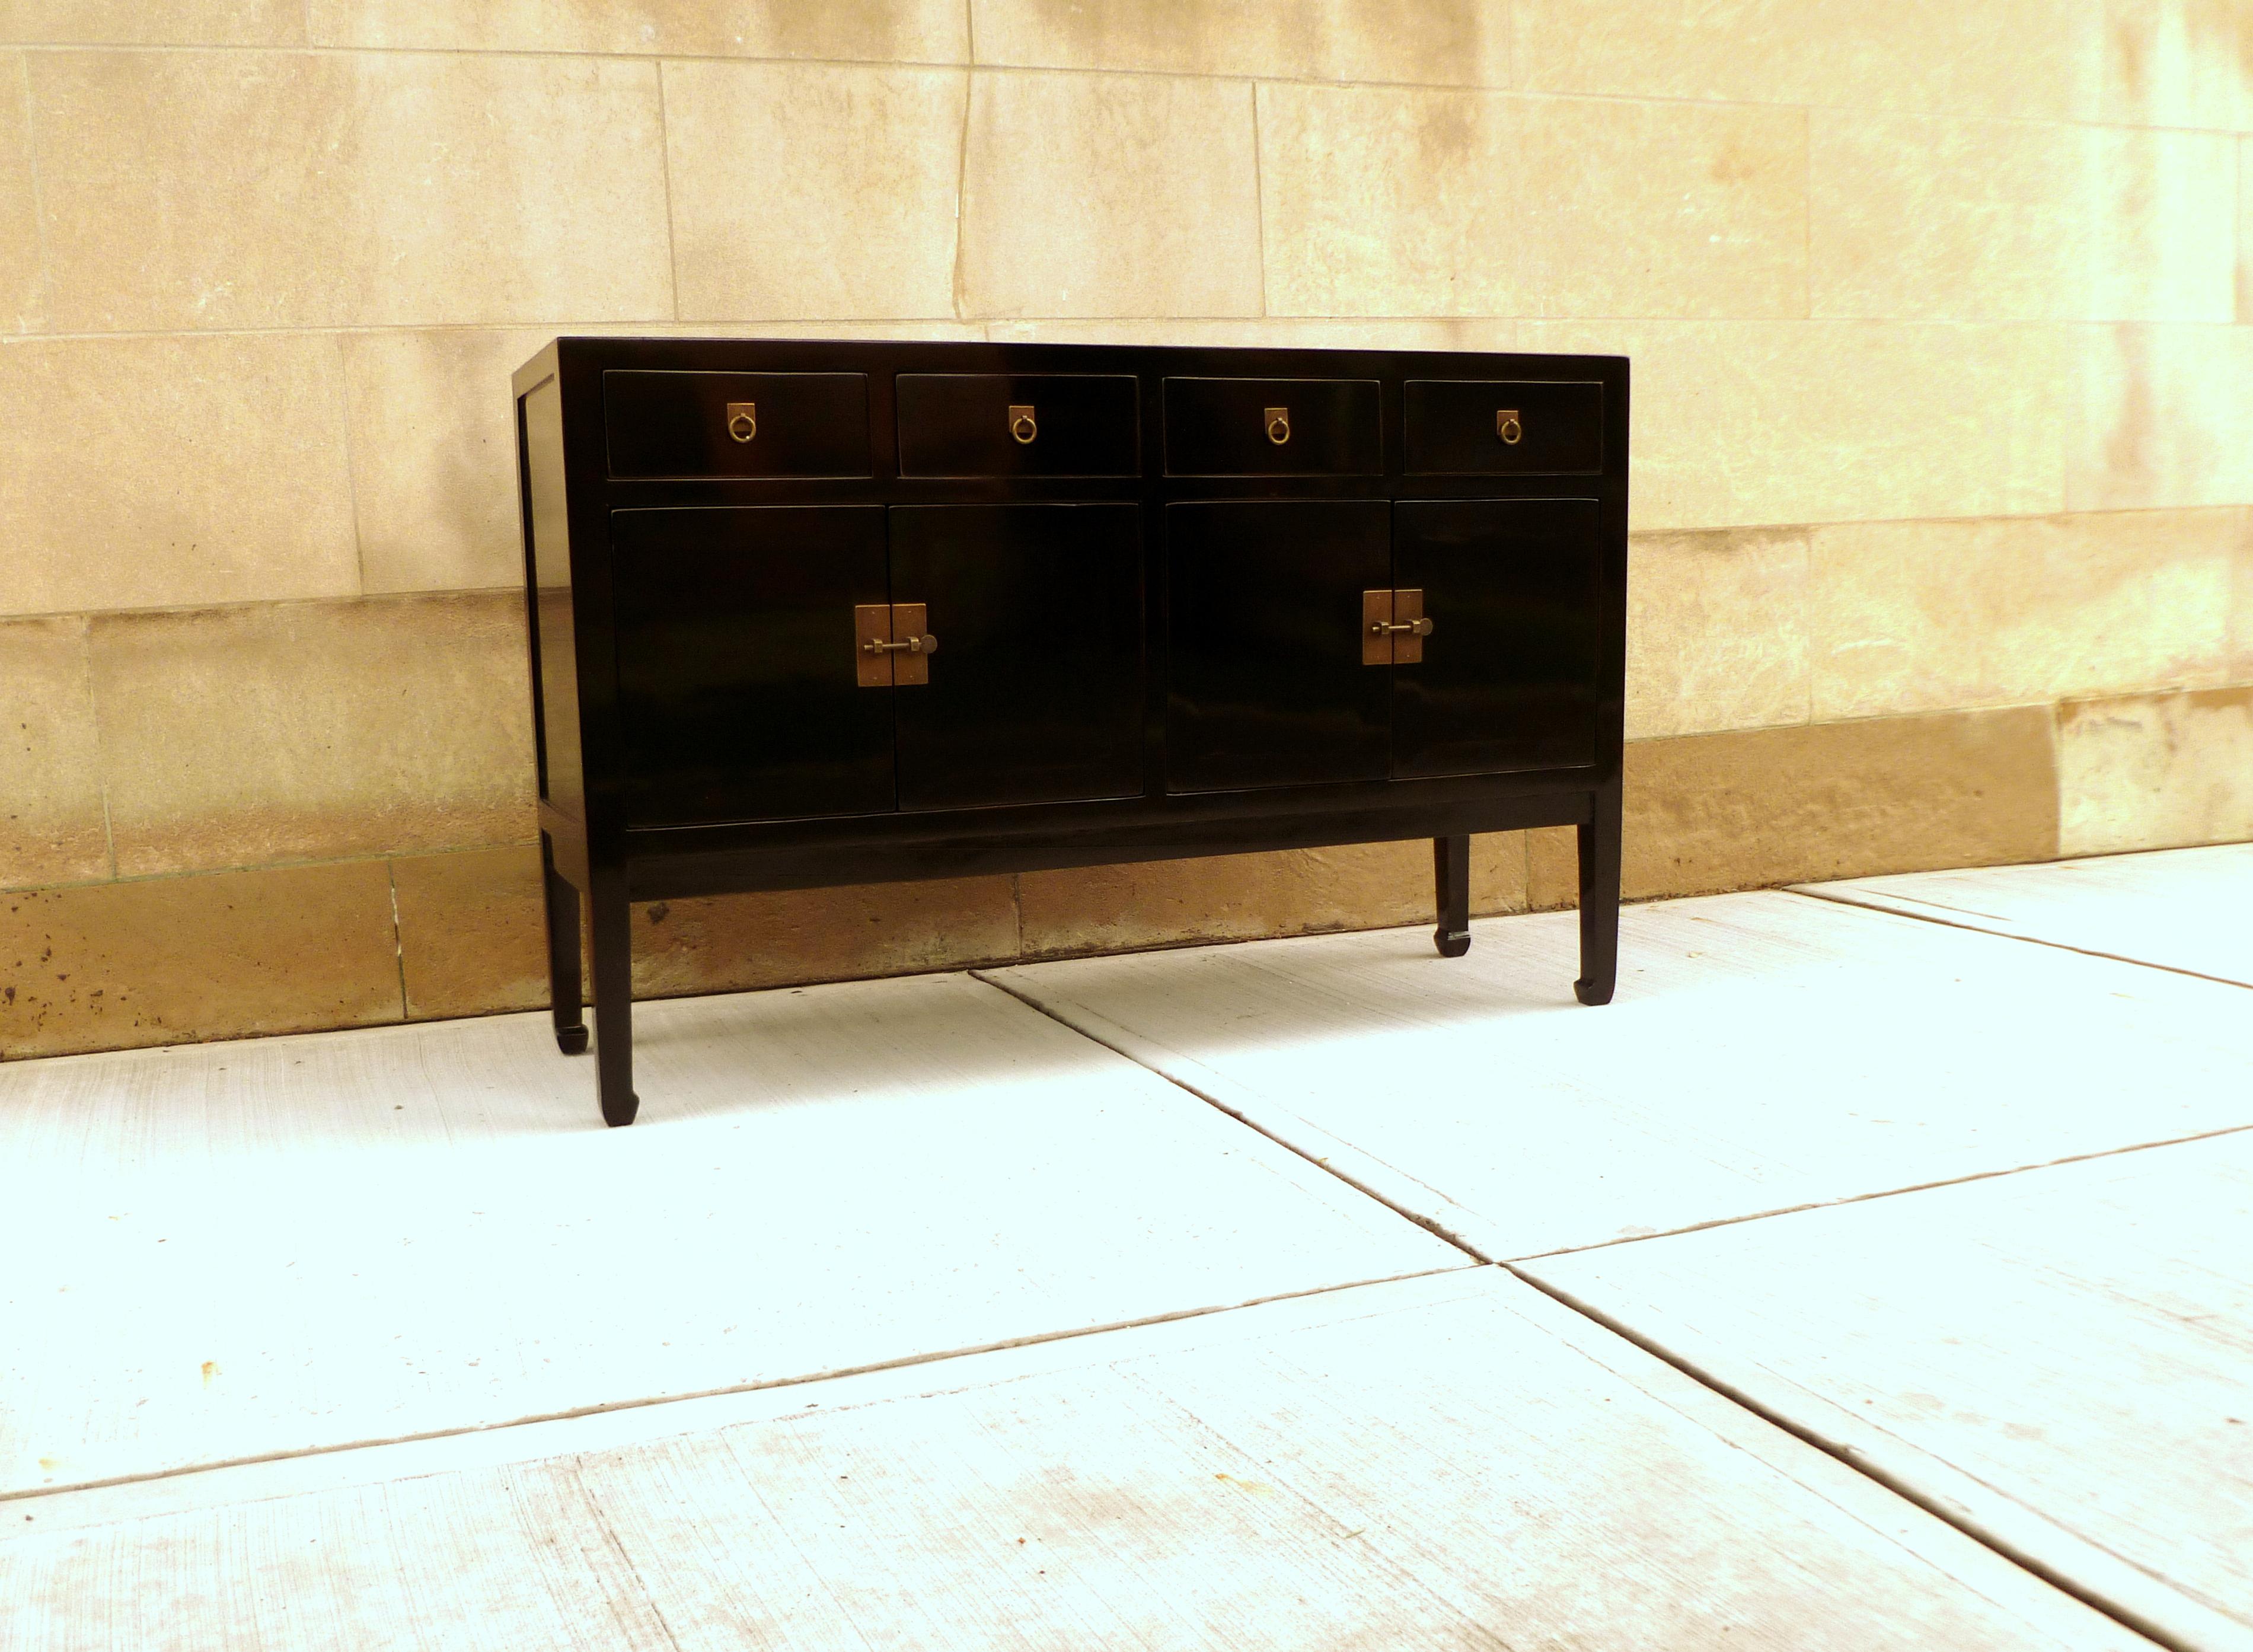 Polished Fine Black Lacquer Sideboard or Console Table